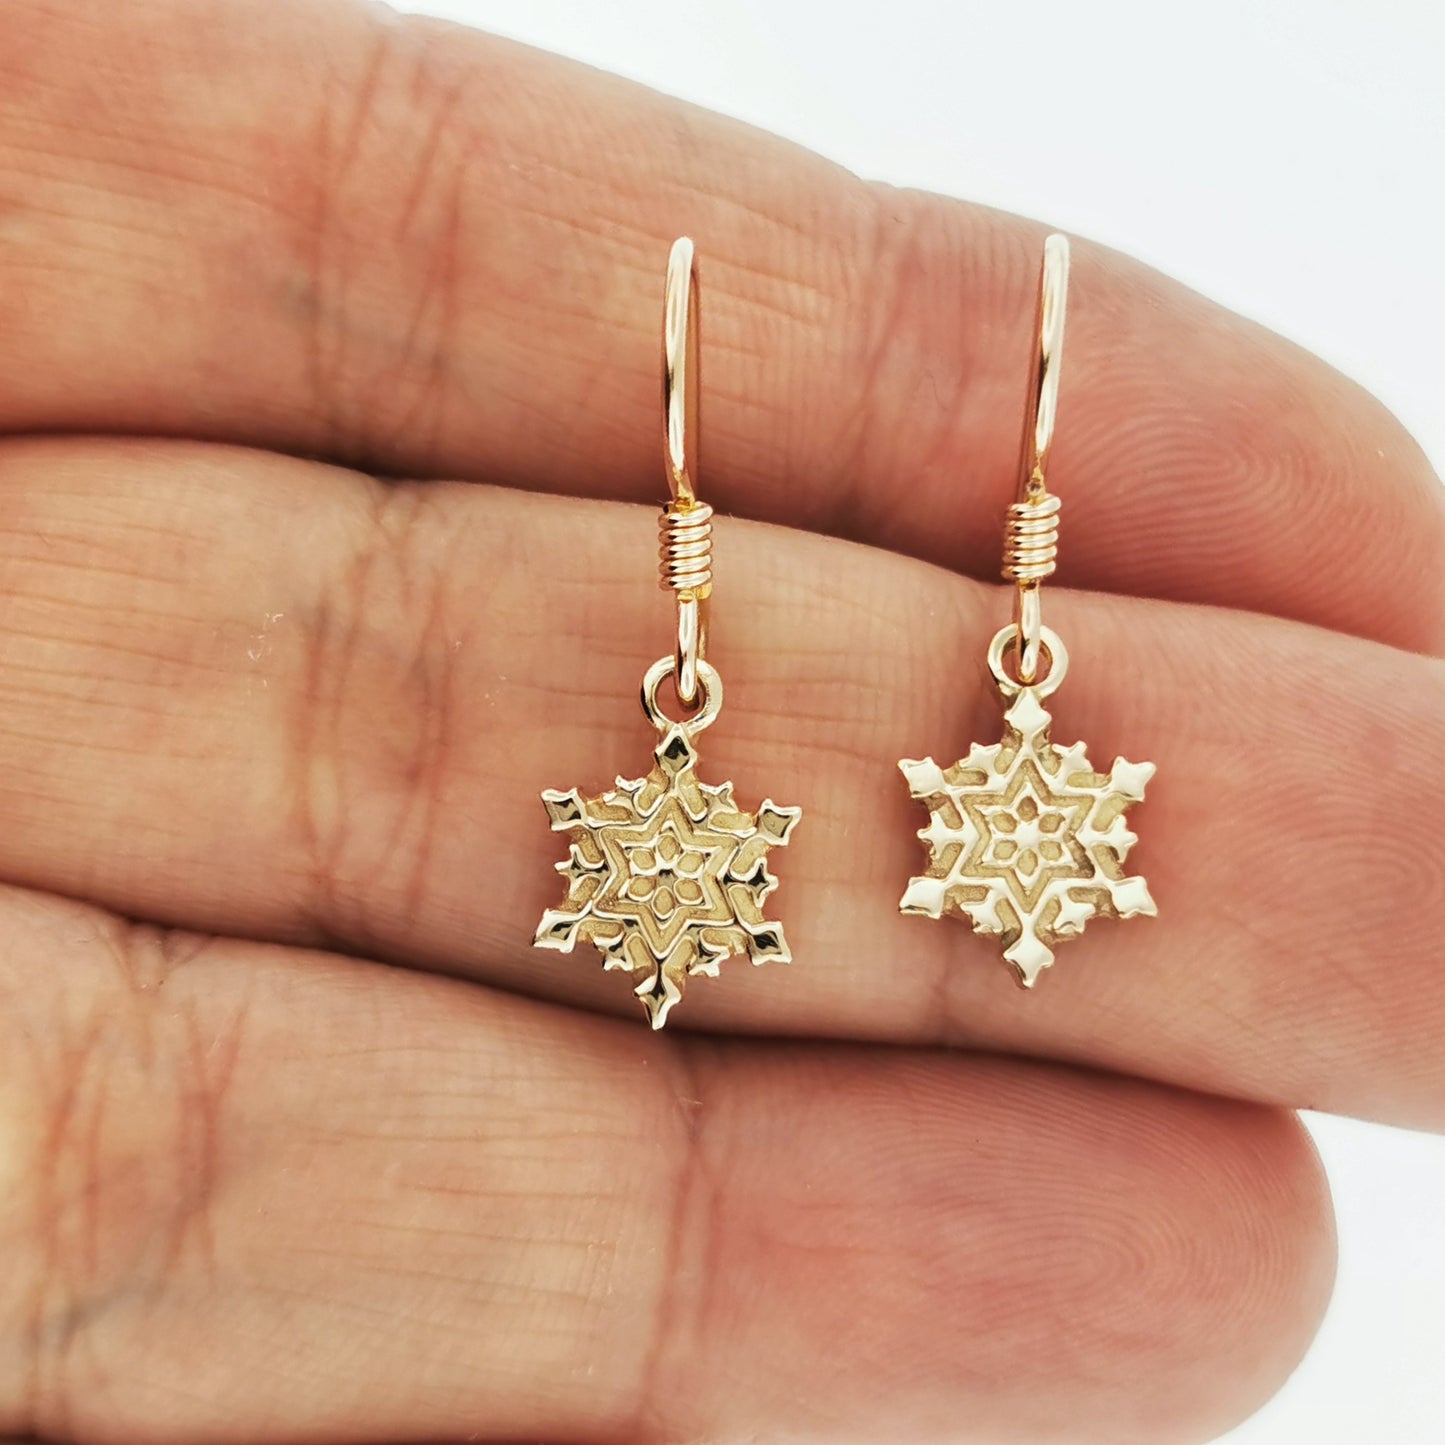 Snowflake Charm Earrings in Sterling Silver or Antique Bronze